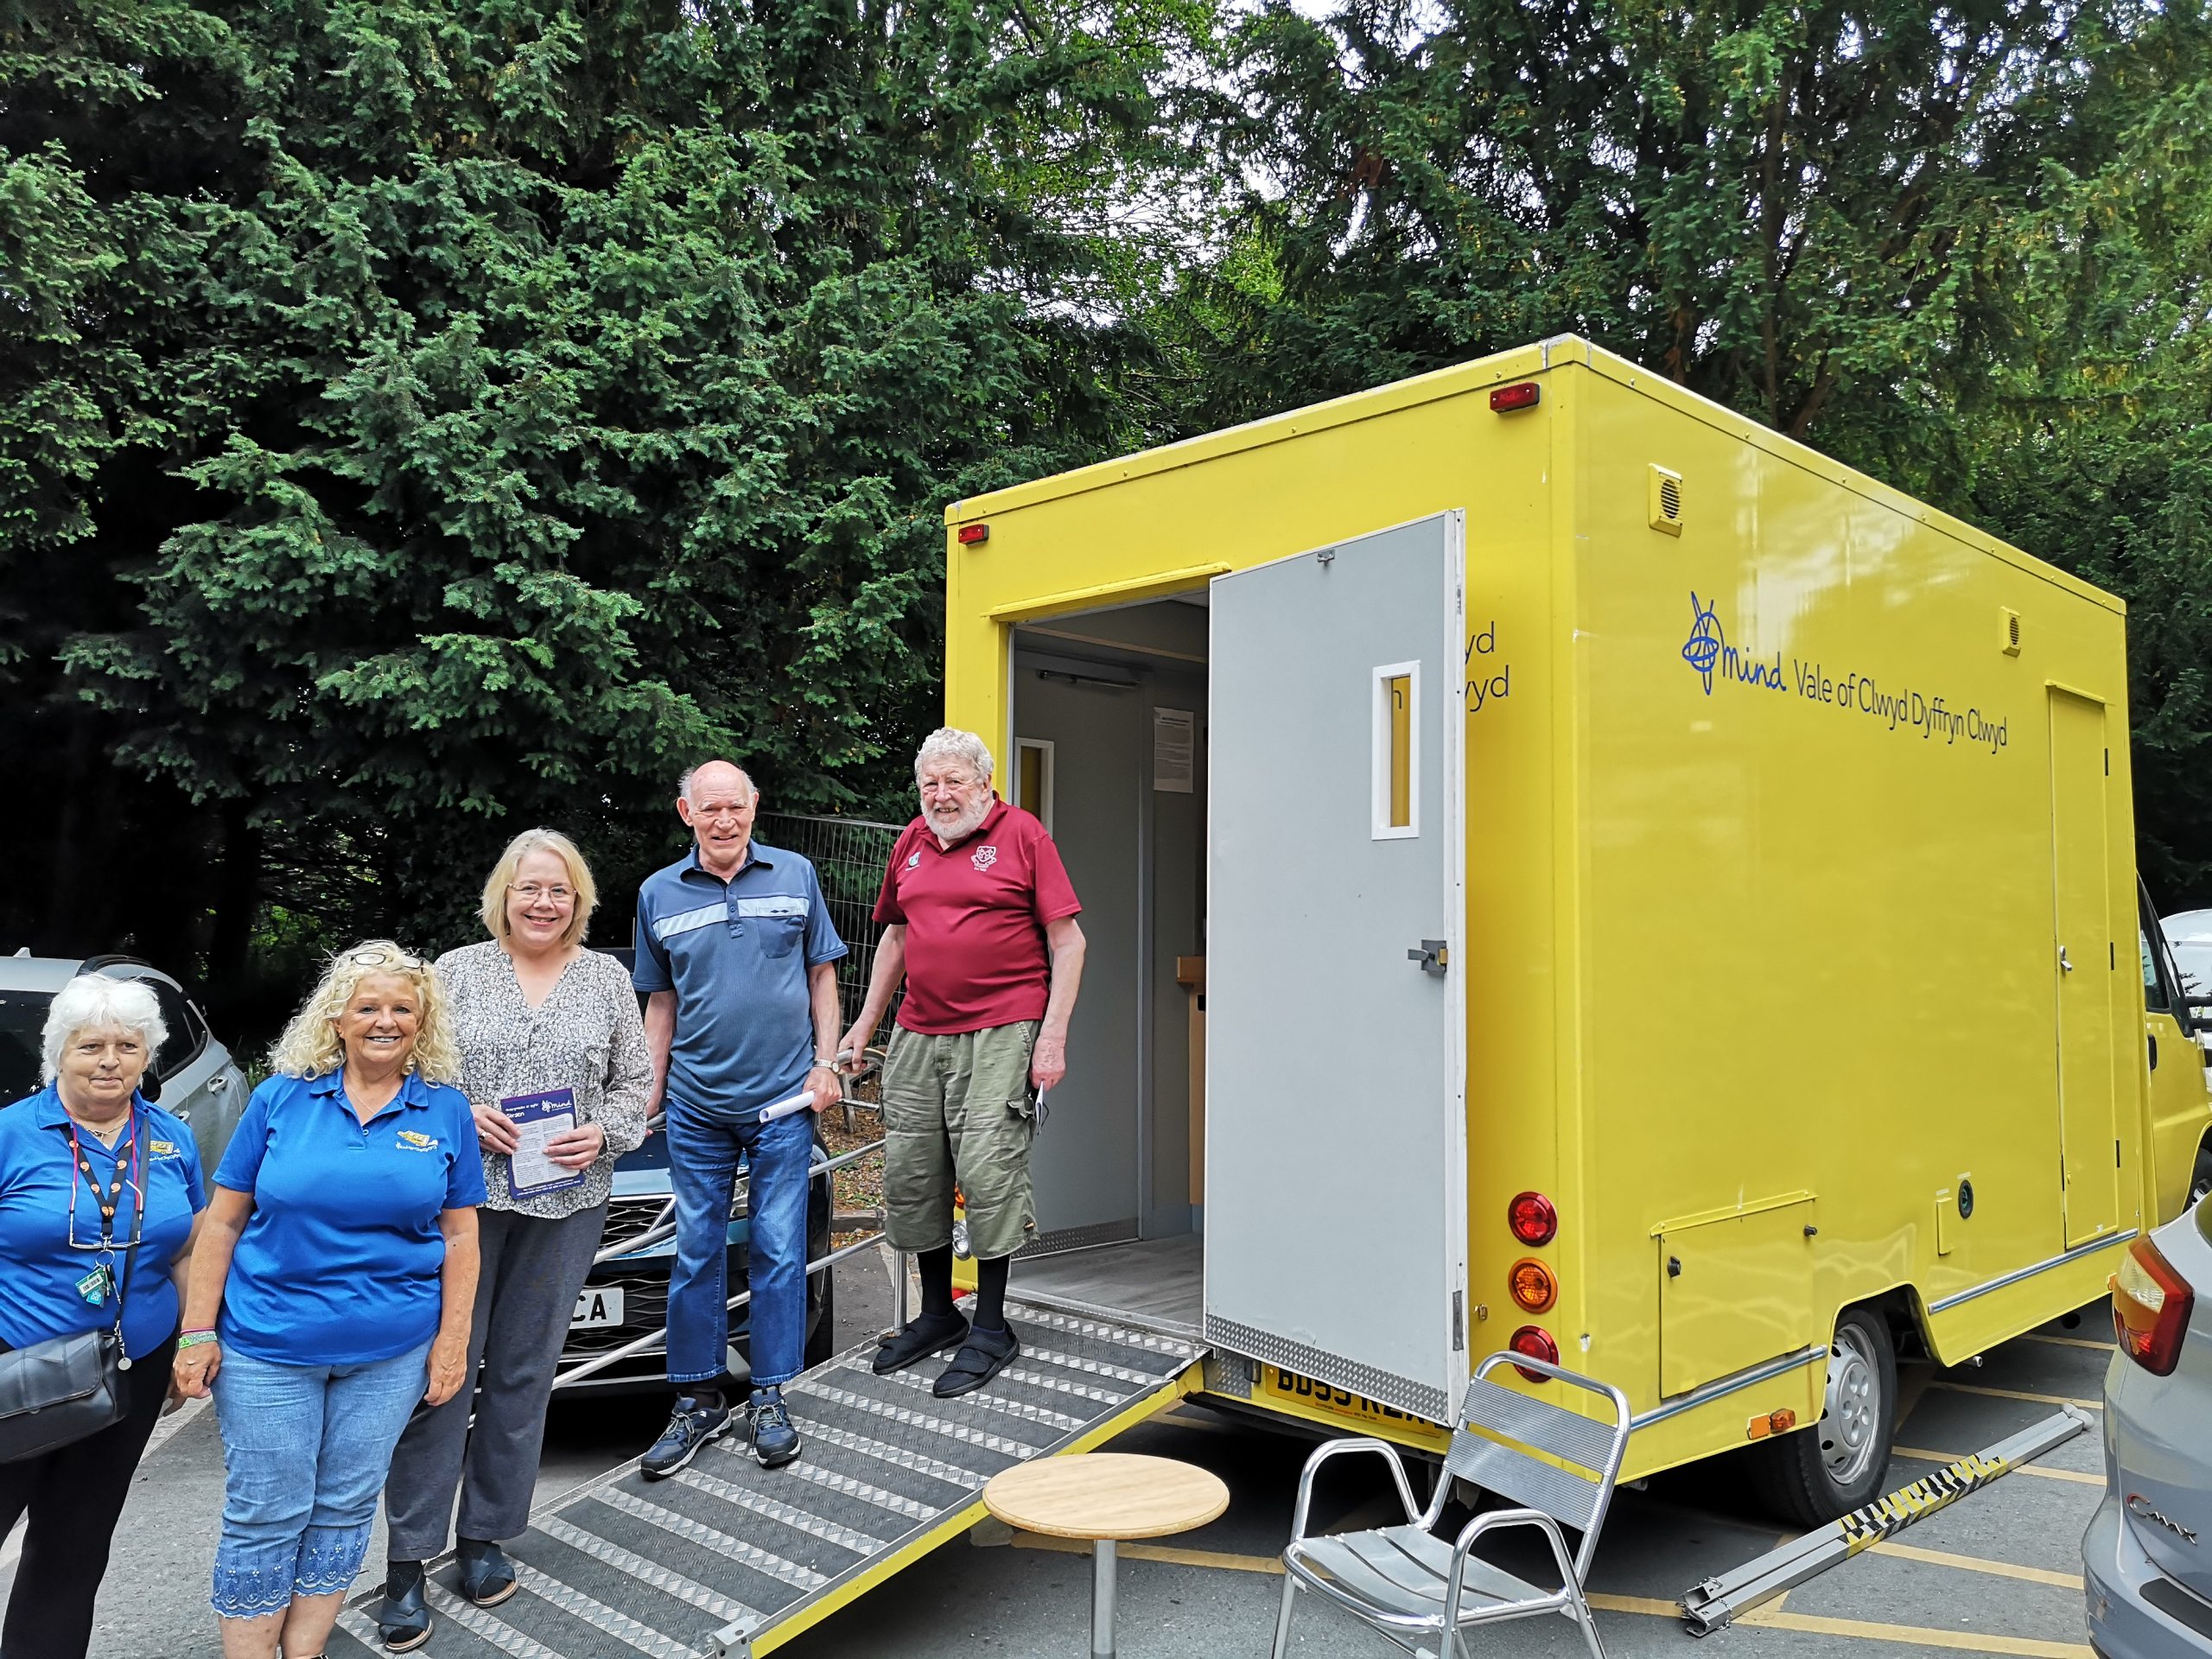 Picture of Doris the yellow bus with residents